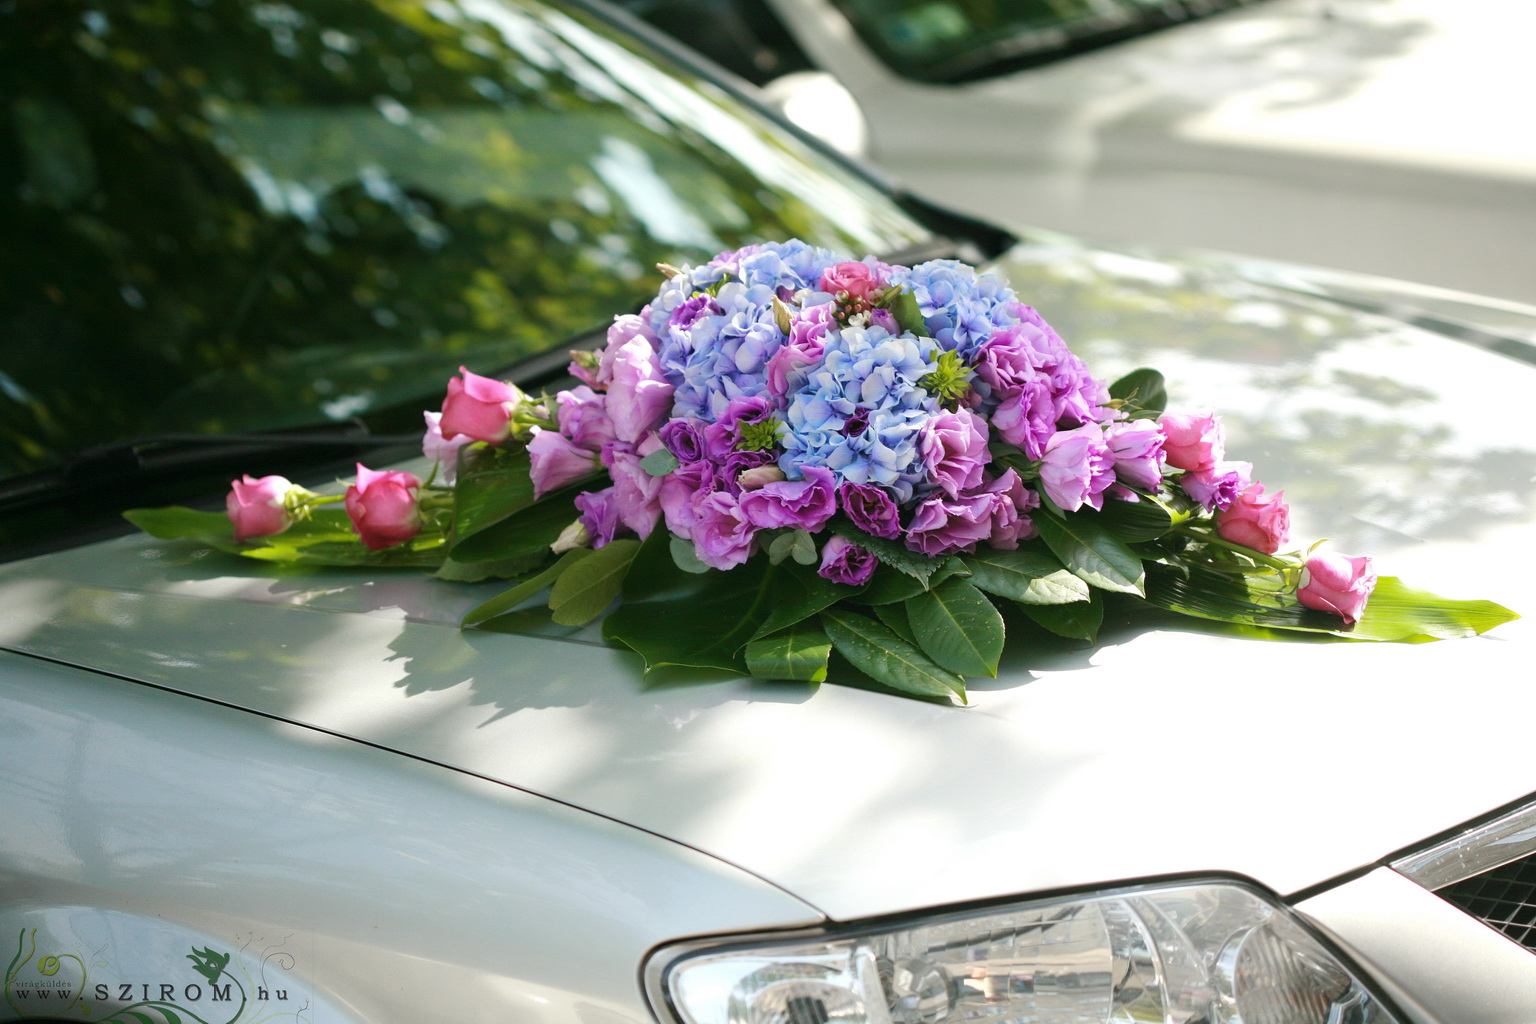 flower delivery Budapest - oval car flower arrangement with hydrangeas (rose, lisianthus, pink, blue, purple)